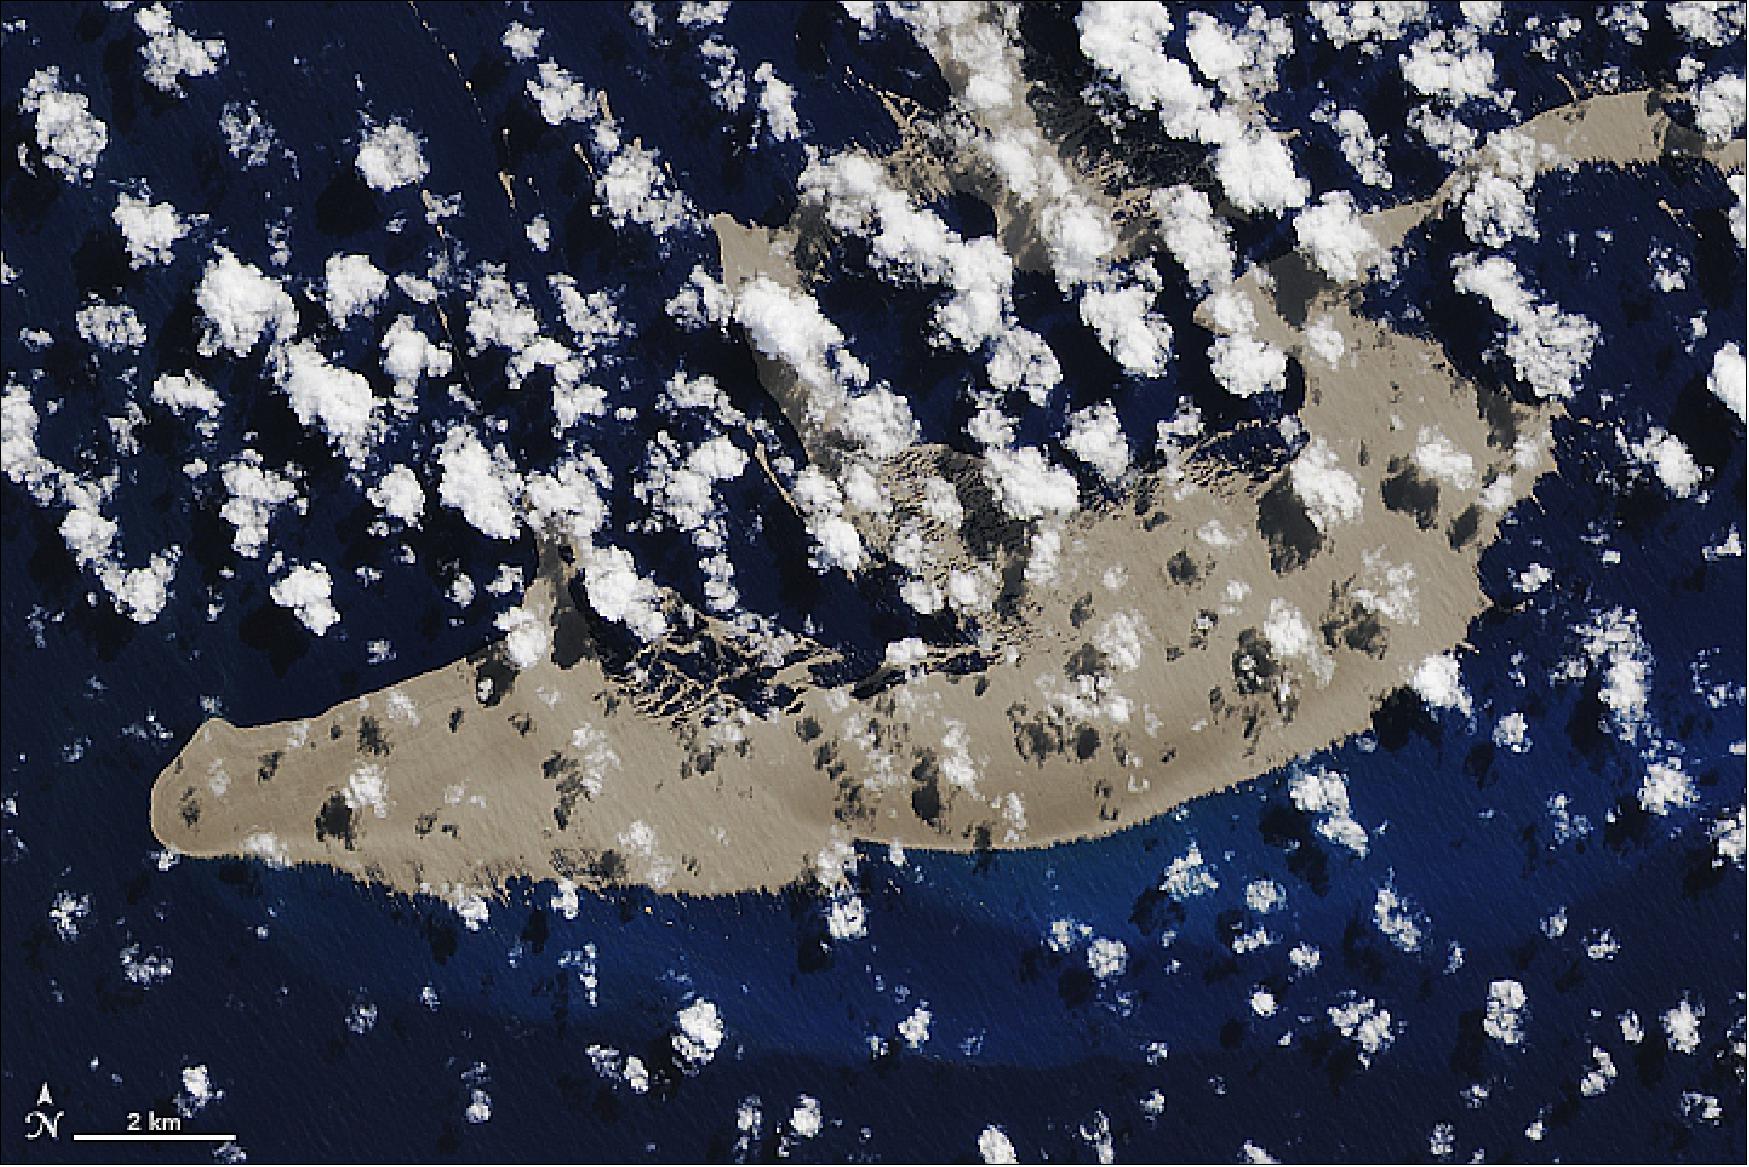 Figure 44: On August 13, 2019, the Operational Land Imager on Landsat 8 acquired natural-color imagery of a vast pumice raft floating in the tropical Pacific Ocean near Late Island in the Kingdom of Tonga (image credit: NASA Earth Observatory, image by Joshua Stevens, using Landsat data from the U.S. Geological Survey. Story by Michael Carlowicz)